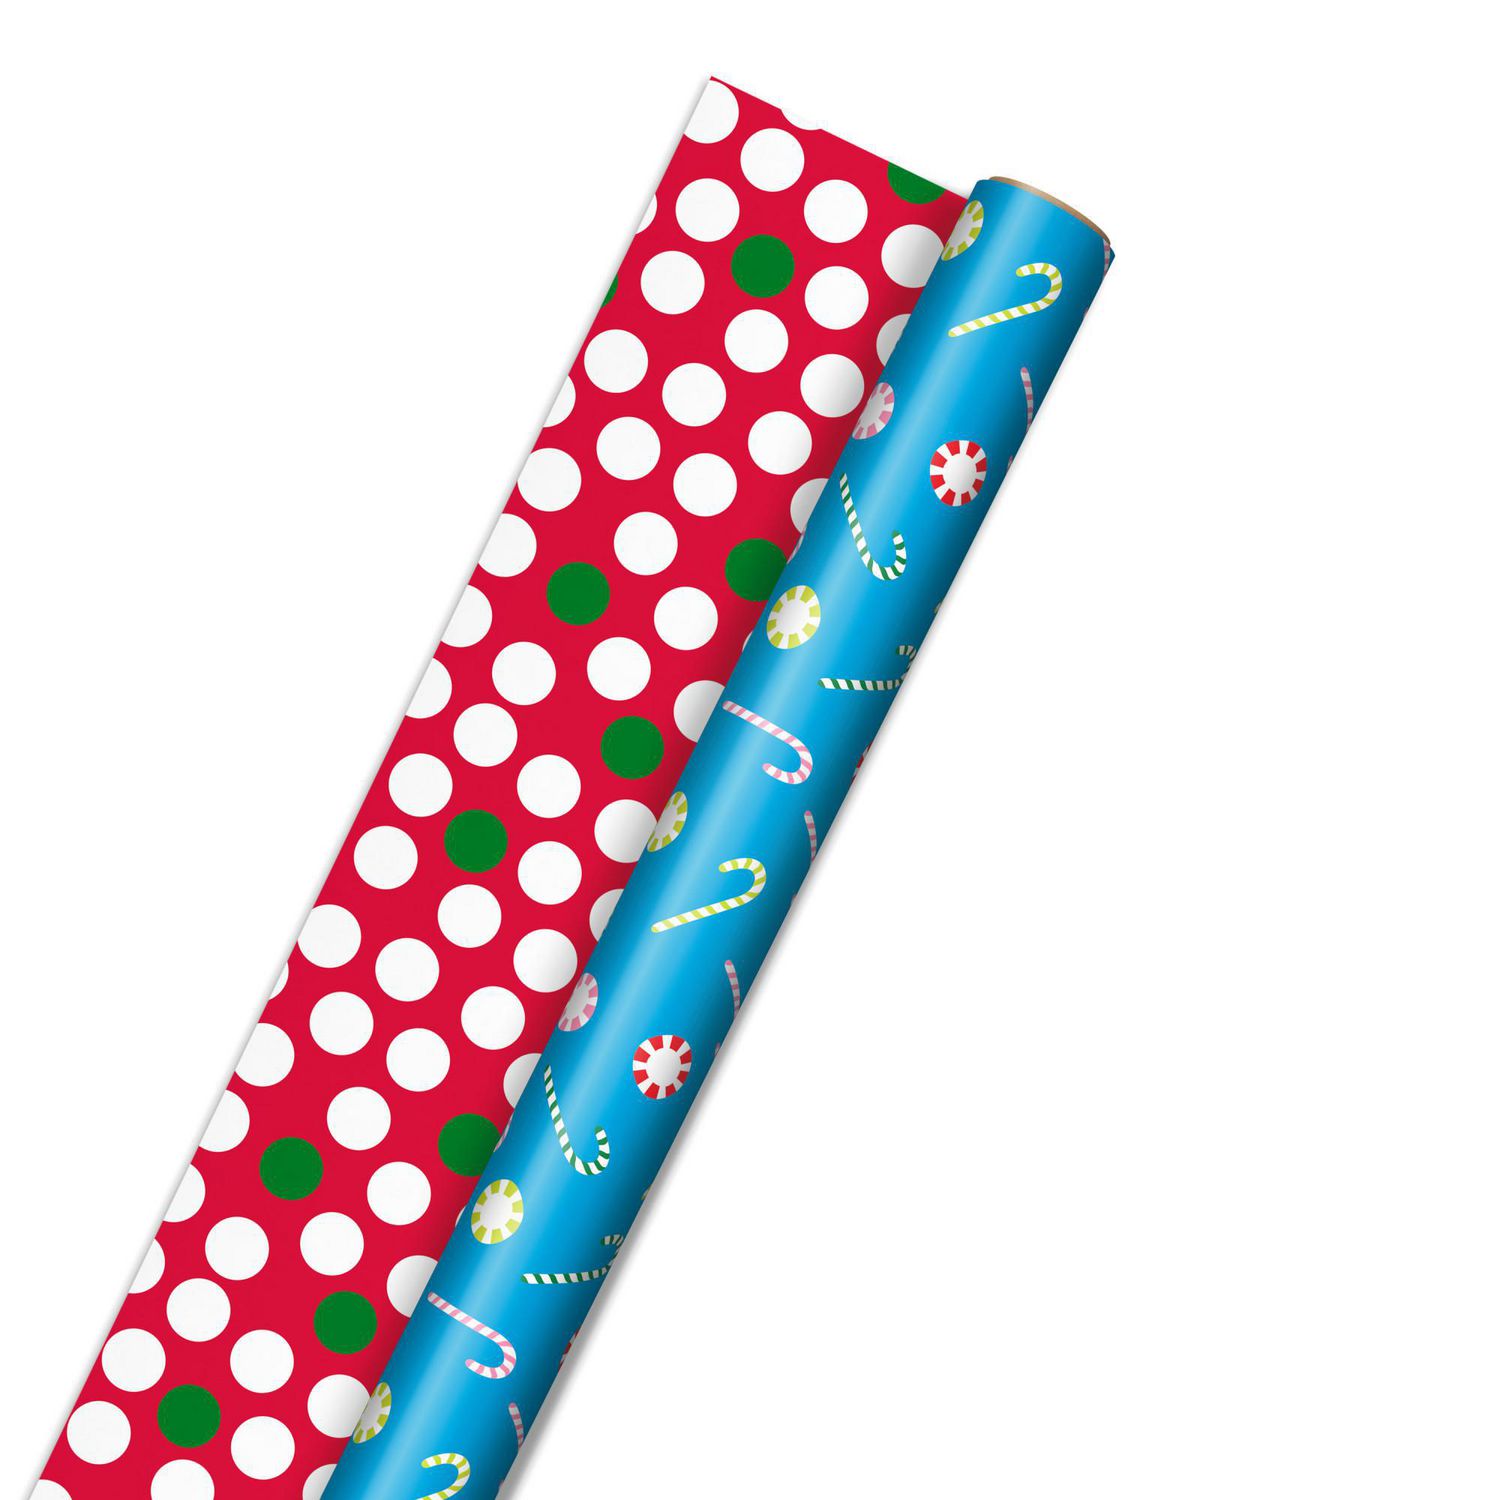 Hallmark Reversible Christmas Wrapping Paper Bundle, Traditional